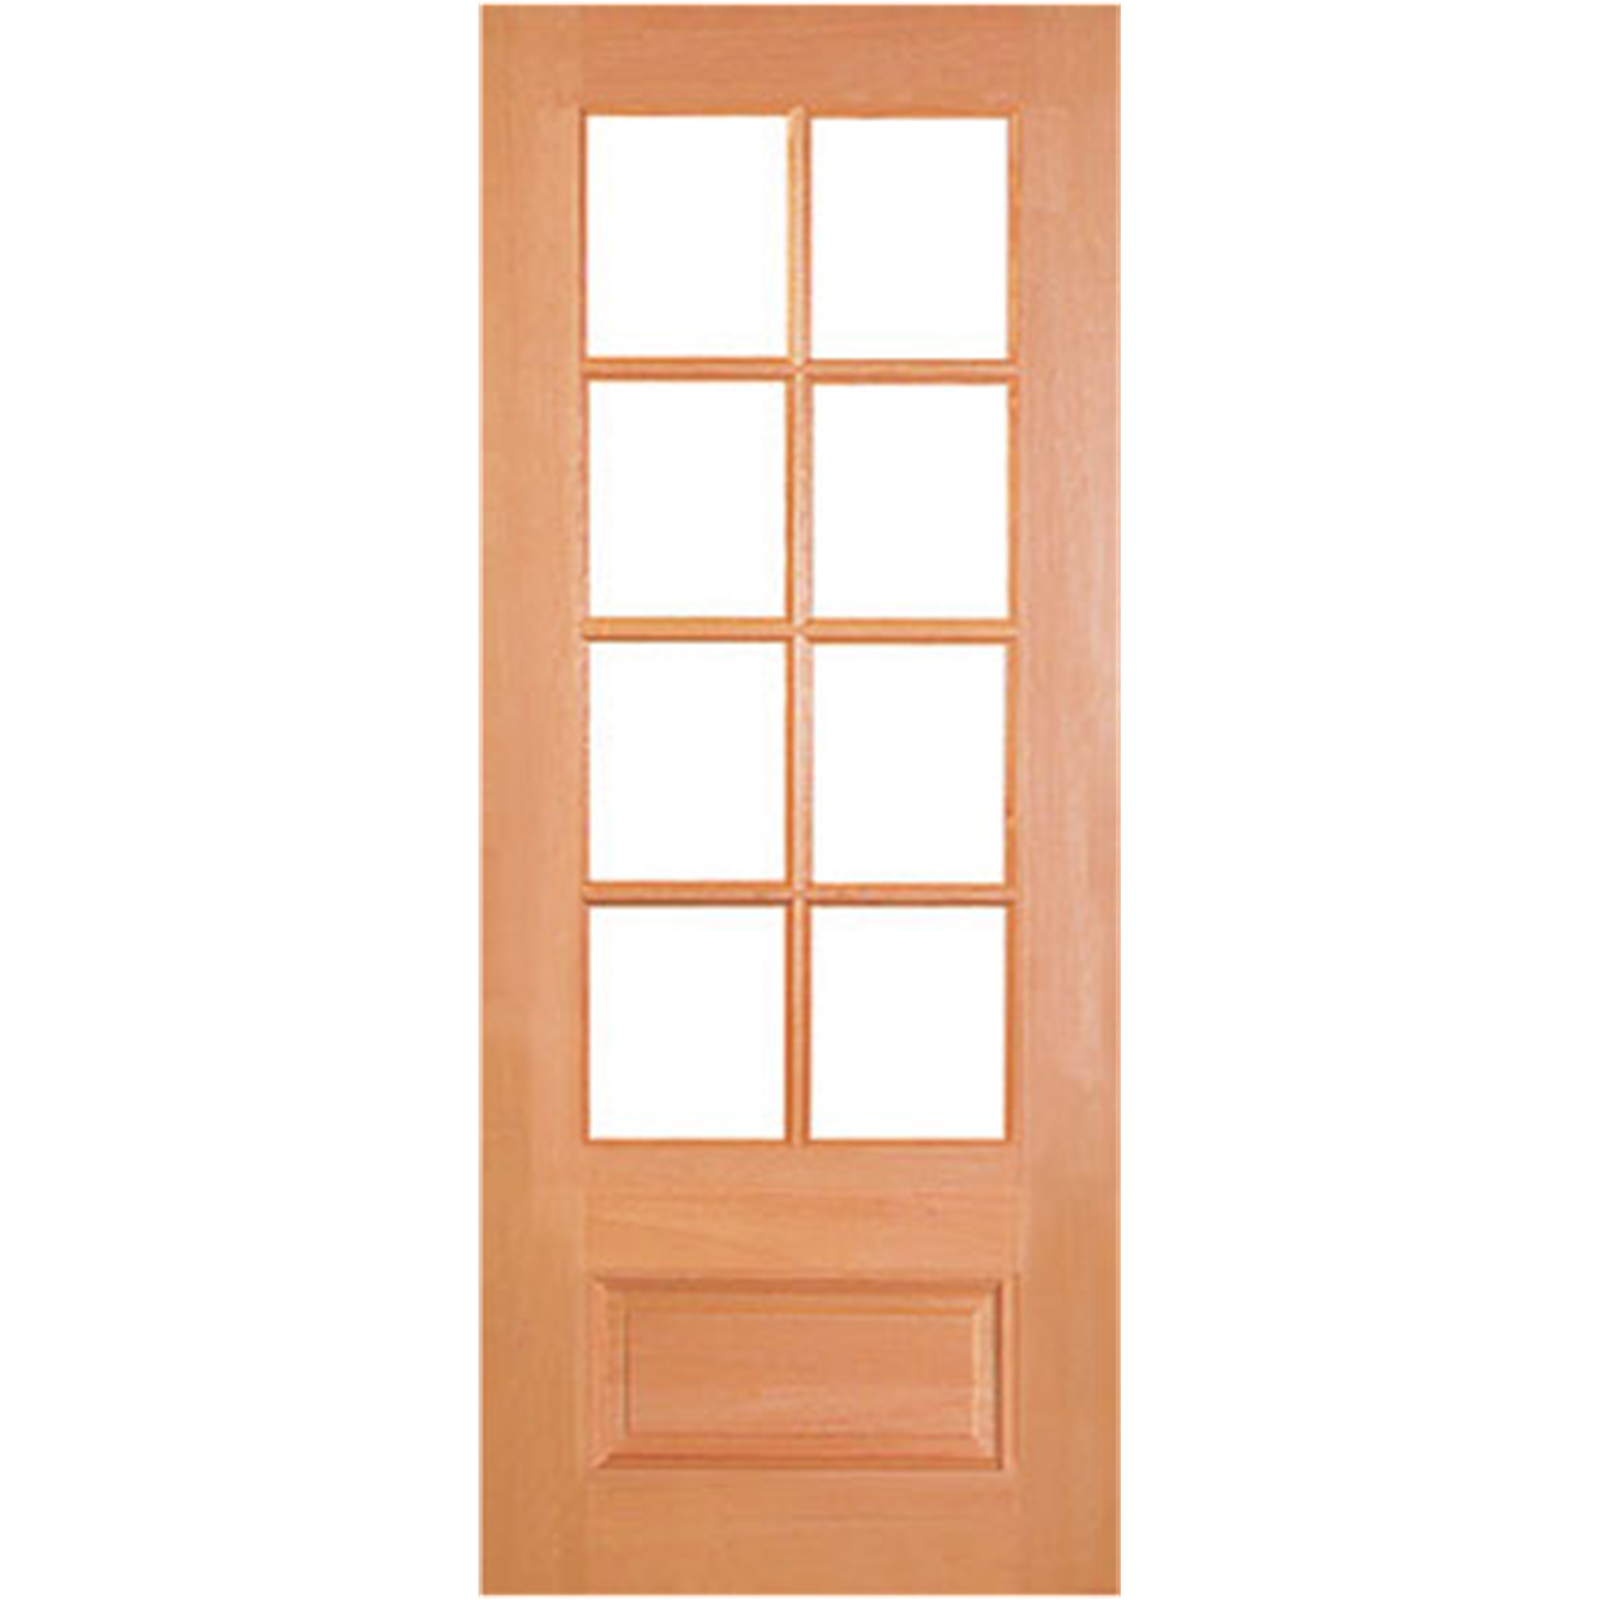 Woodcraft Doors 2040 x 820 x 40mm Clear Safety Glass Whitehouse Entrance Door